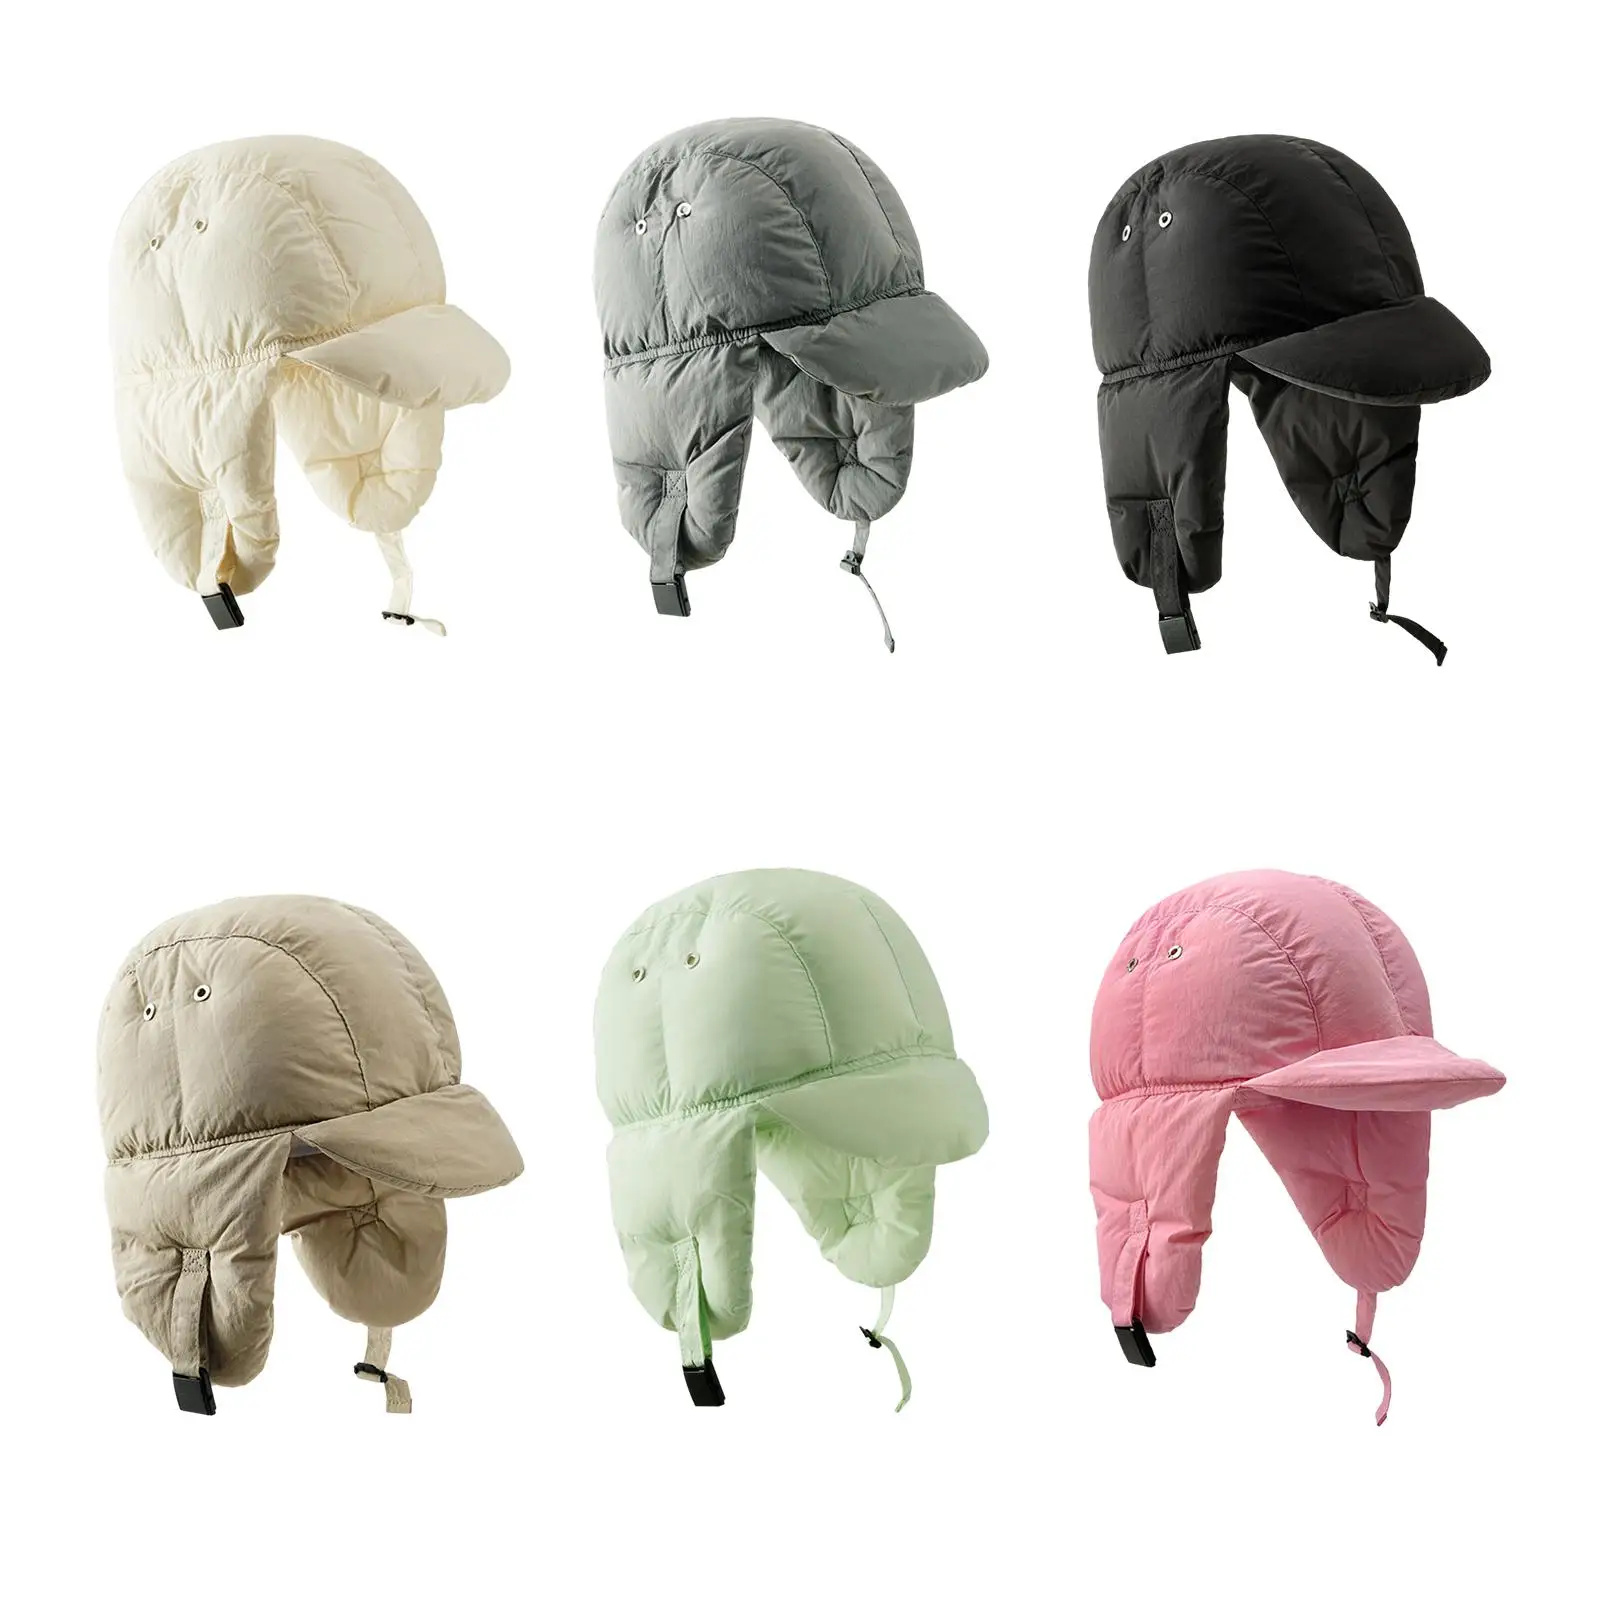 Hat with Earflaps Warm Hat with Peak for Men Women Peaked Hat Baseball Cap Winter Hat Filled Hat for Snow Sports Hiking